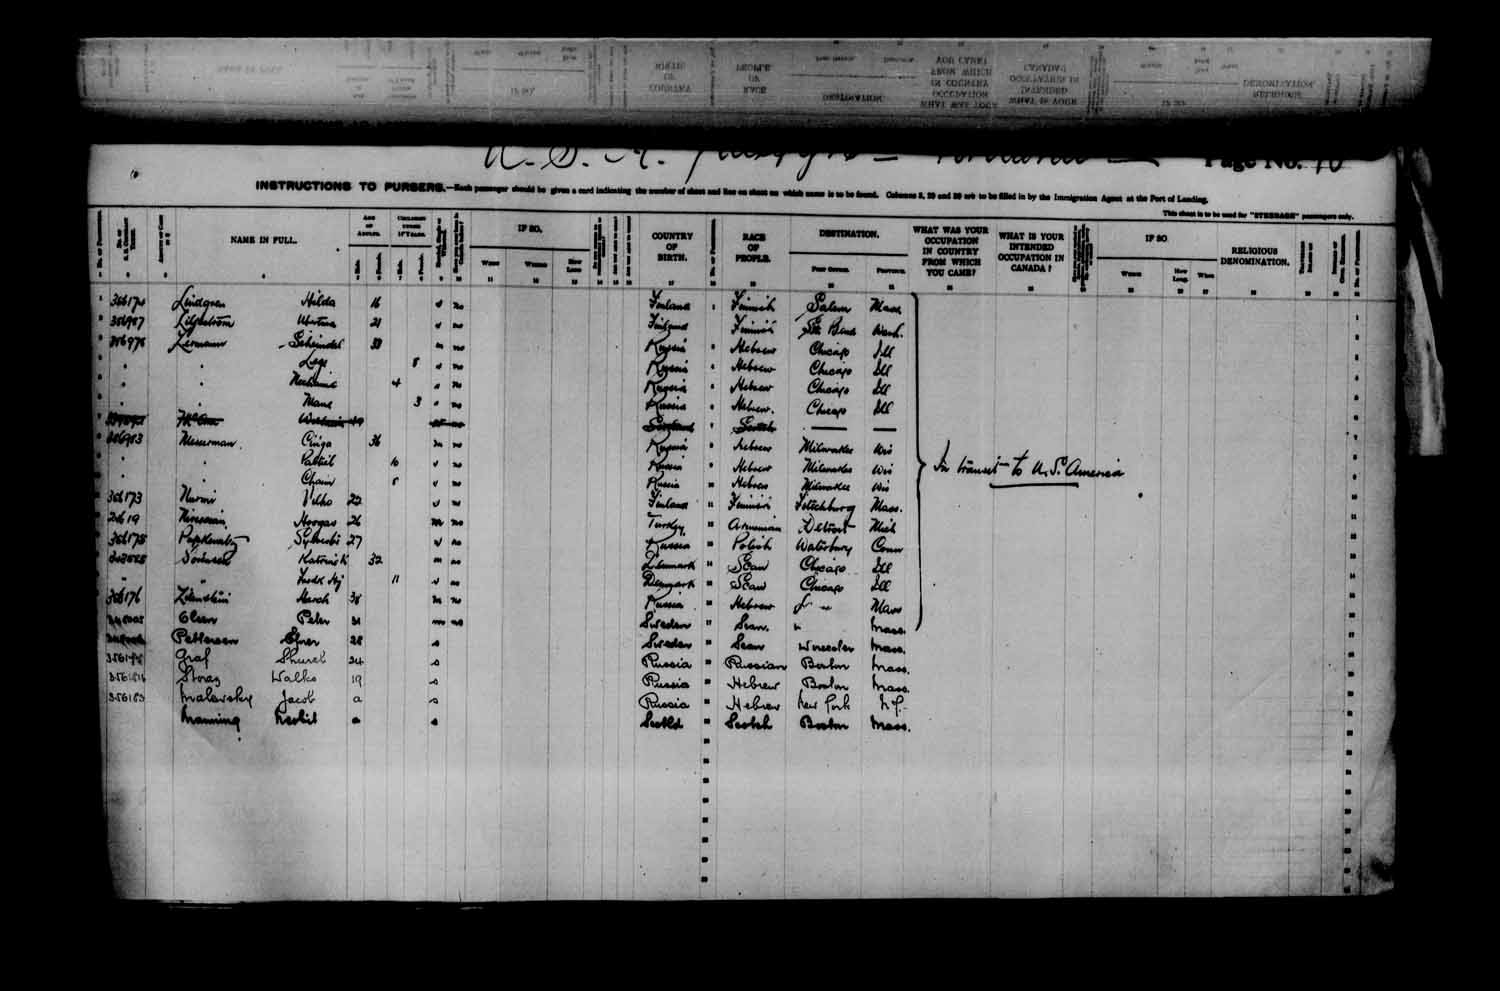 Digitized page of Passenger Lists for Image No.: e003622998